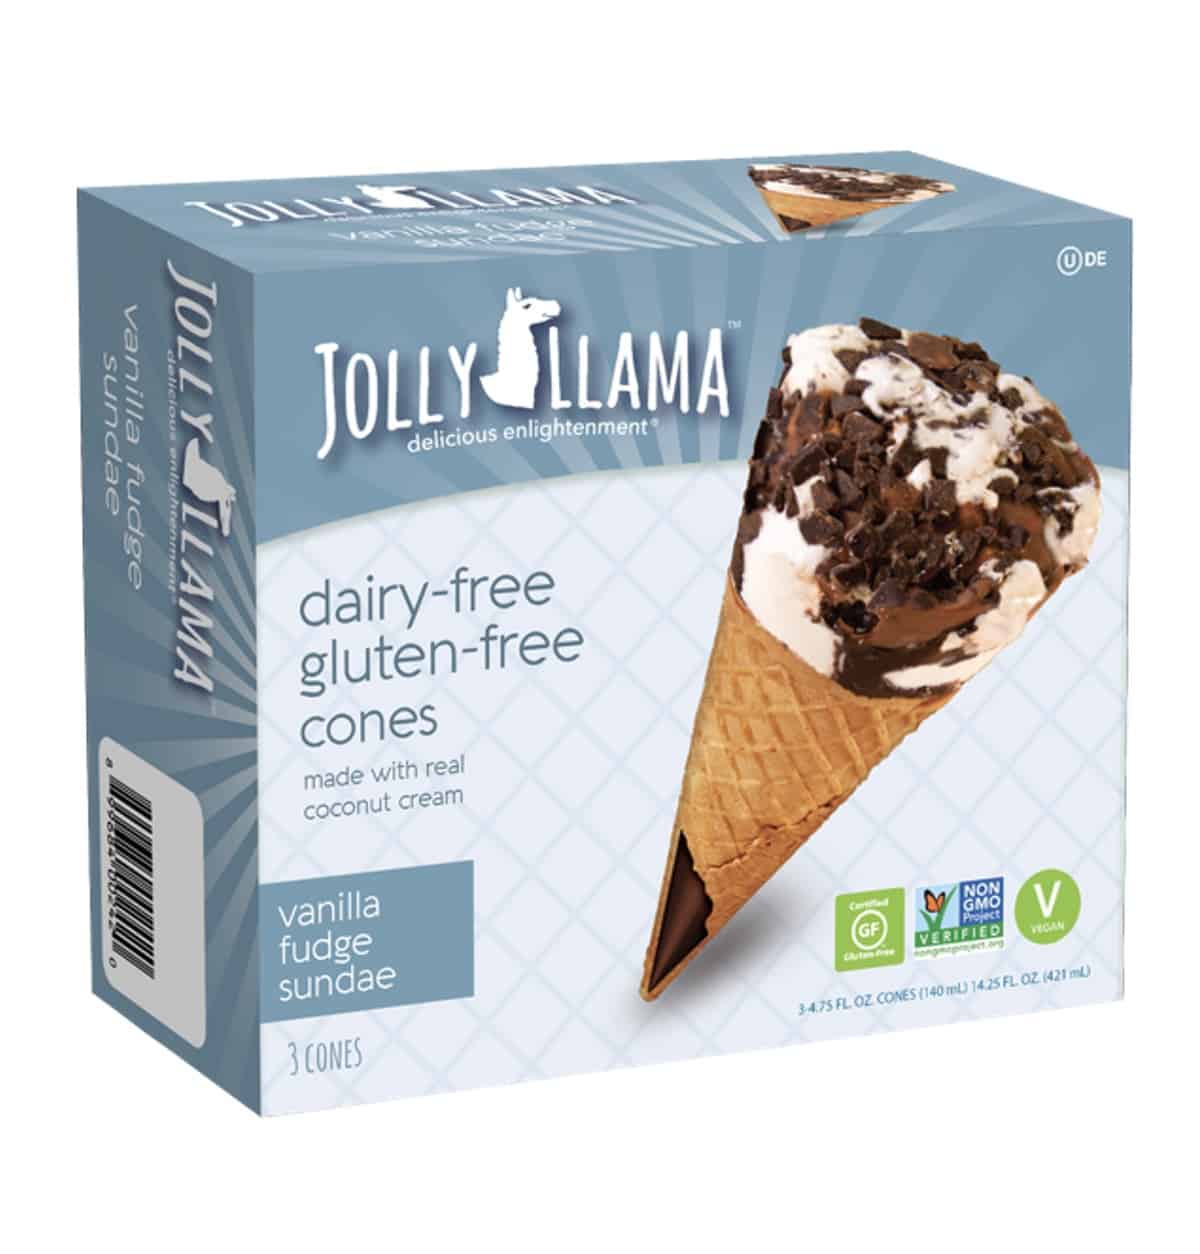 Jolly Llama's dairy free and gluten free ice cream cones in a box. 